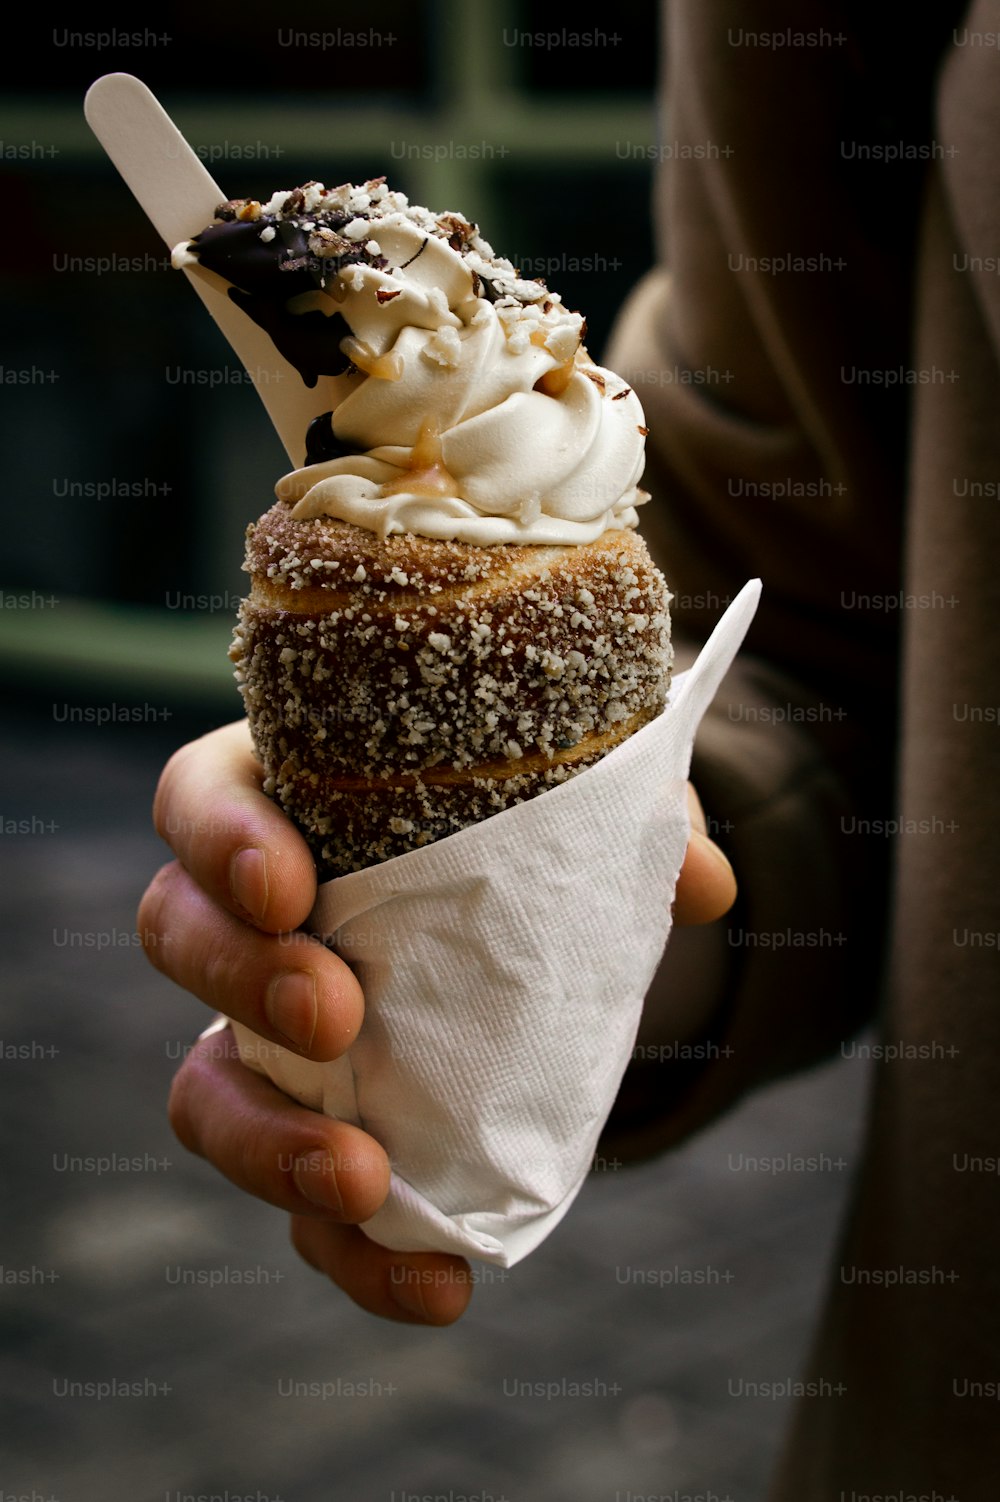 a person holding a pastry in their hand